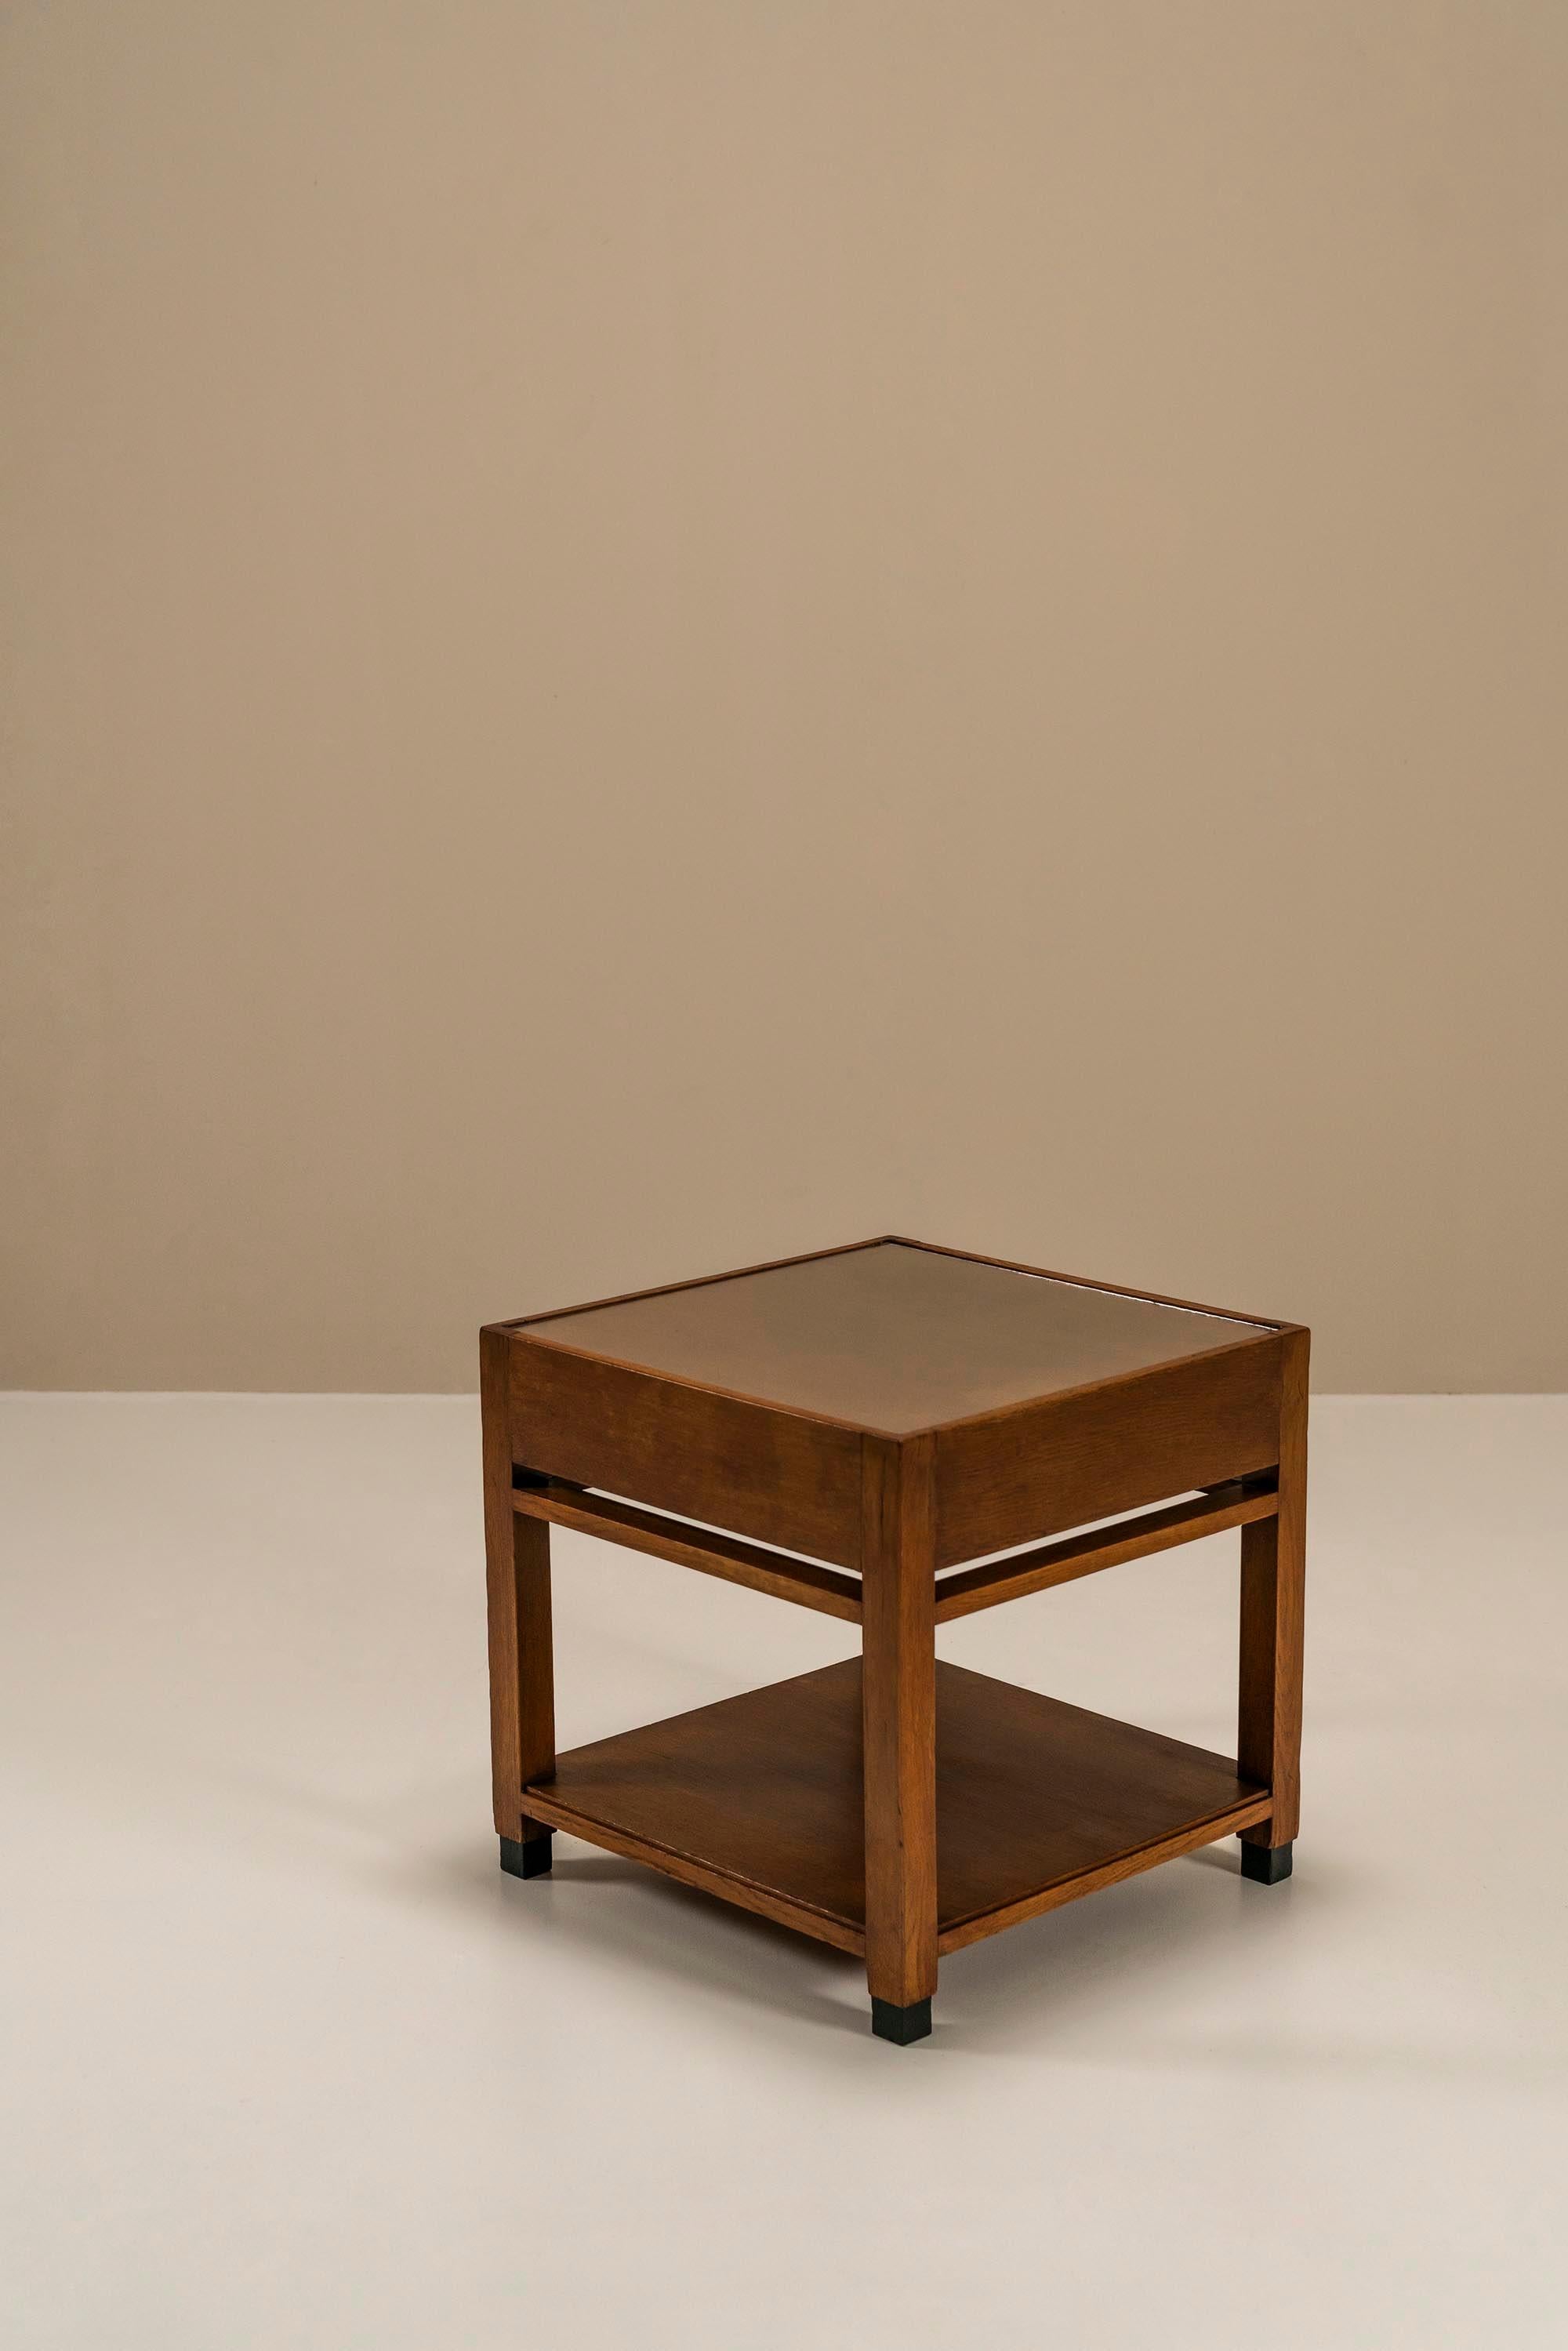 Art Deco The Hague School Square Coffee Table In Oak, The Netherlands 1930s For Sale